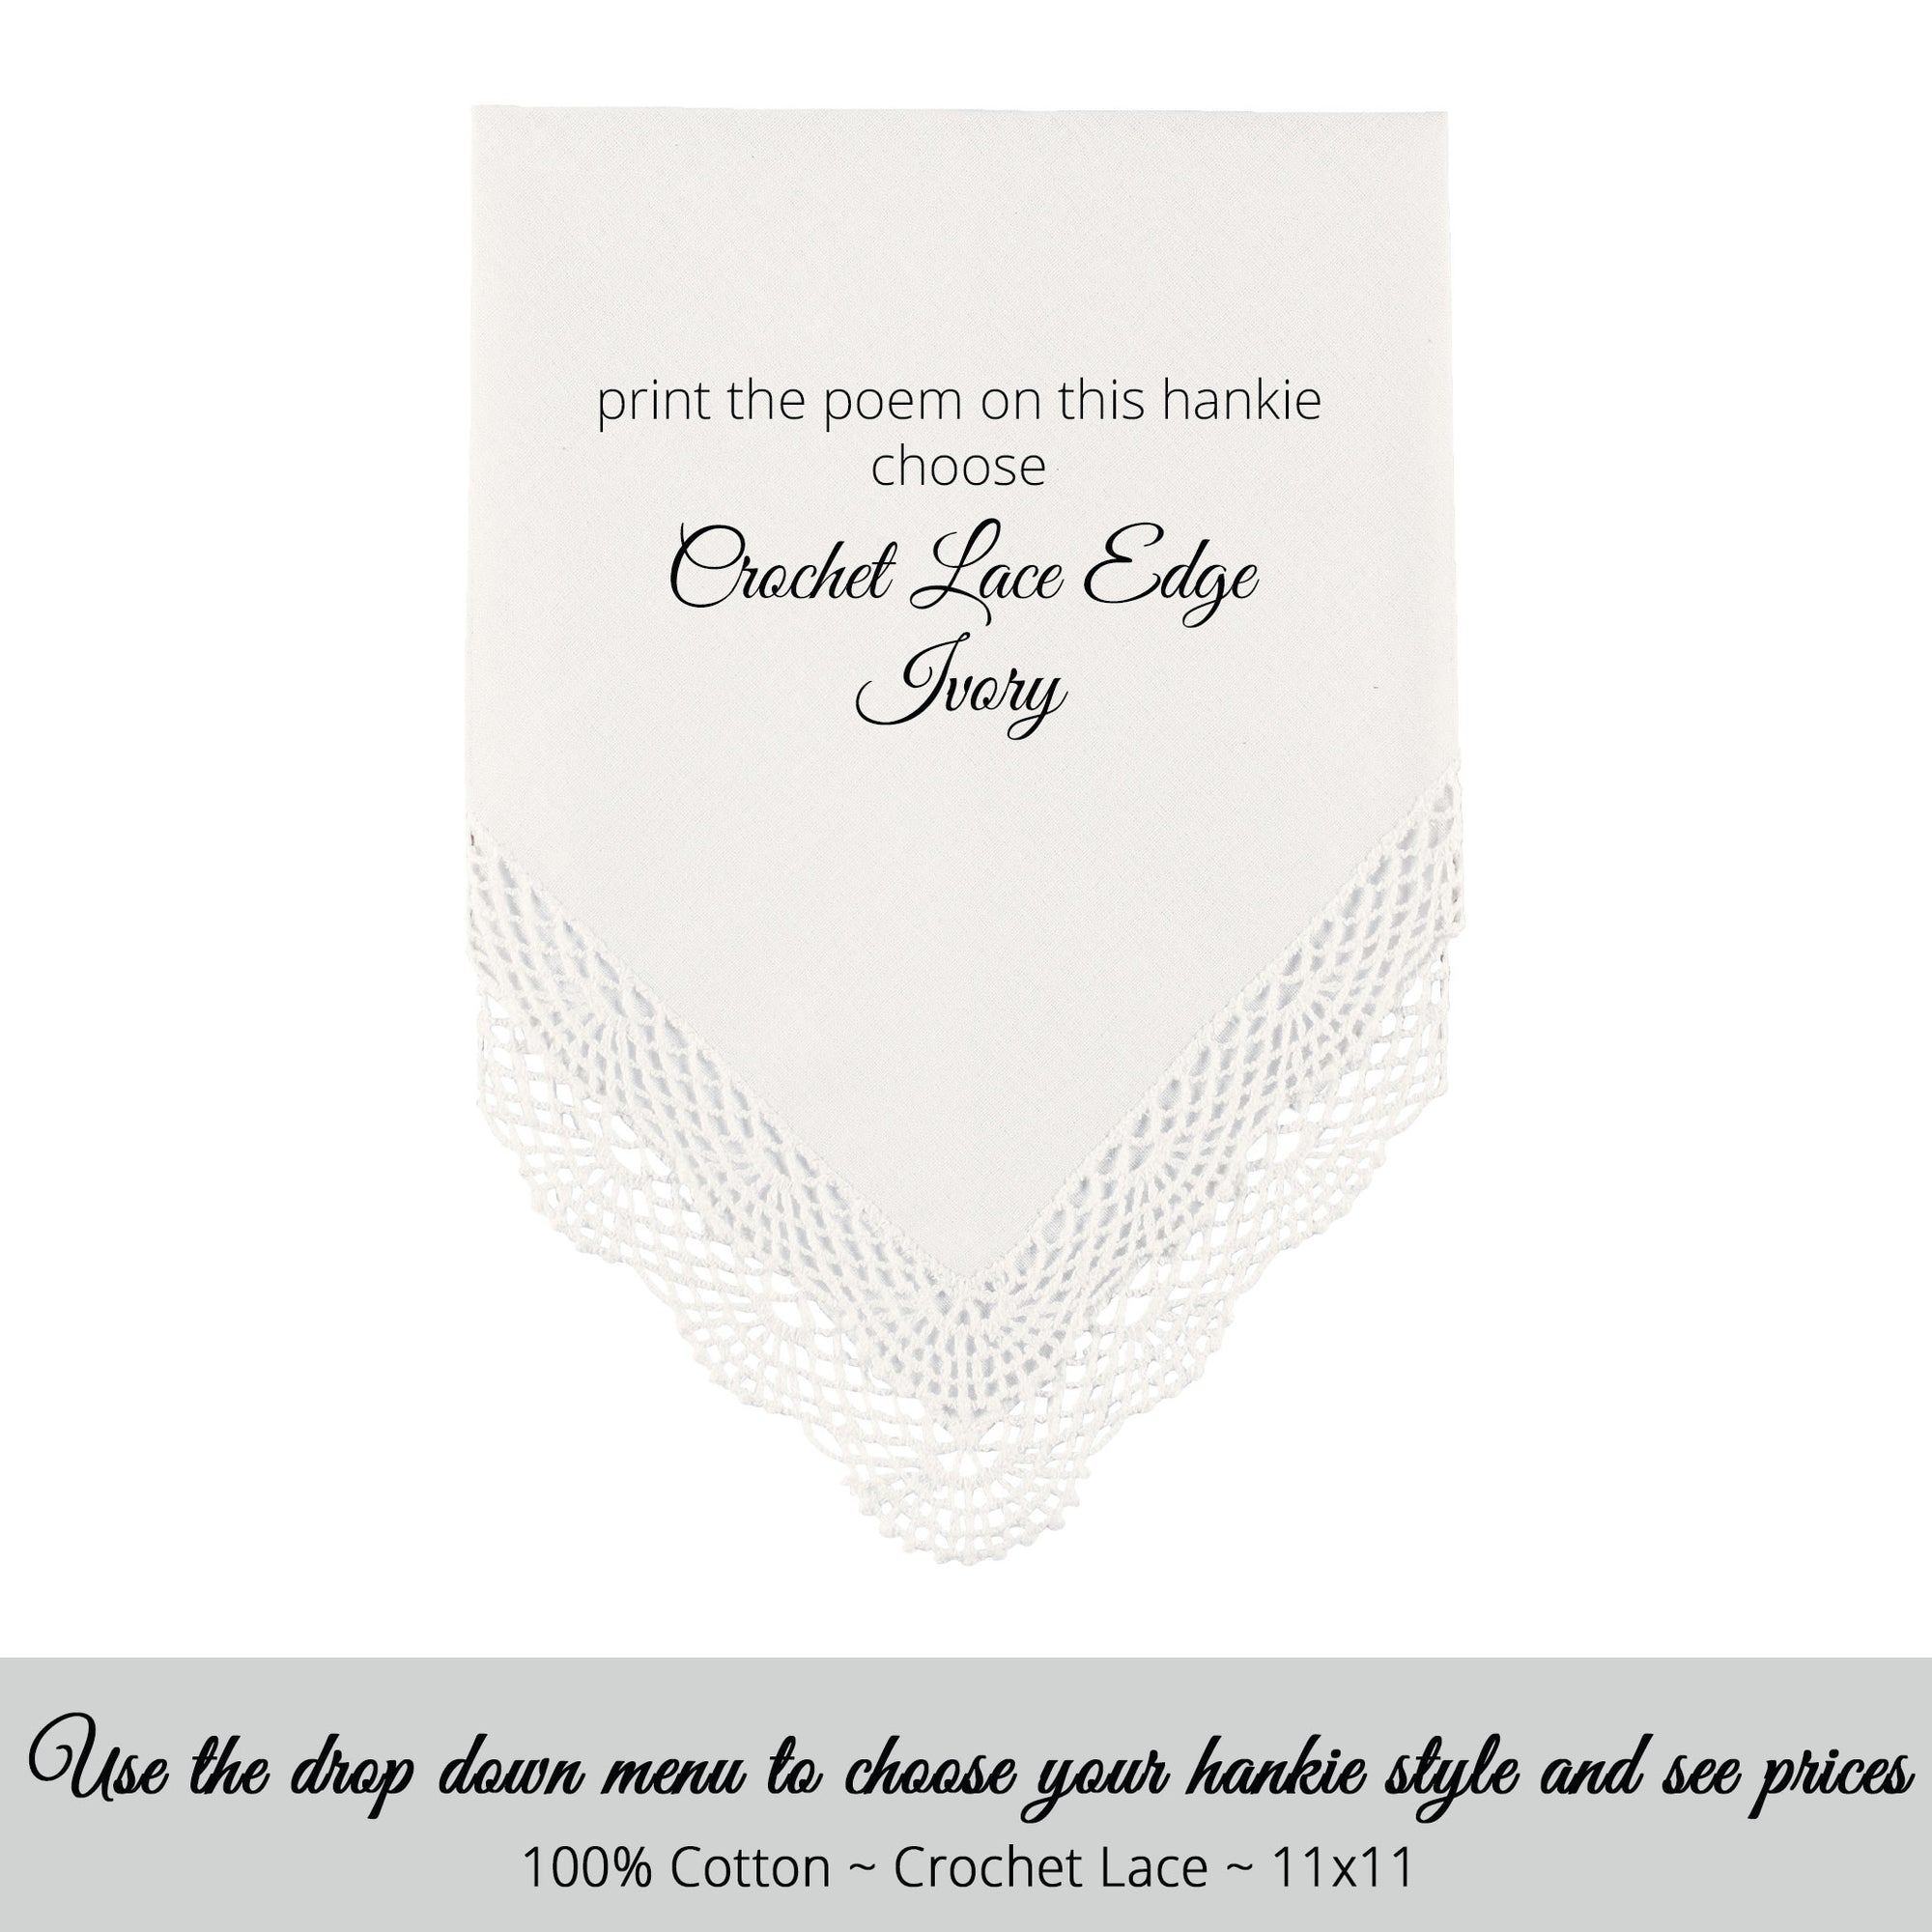 Wedding handkerchief ivory with crochet lace edge for the bridesmaid poem printed hankie